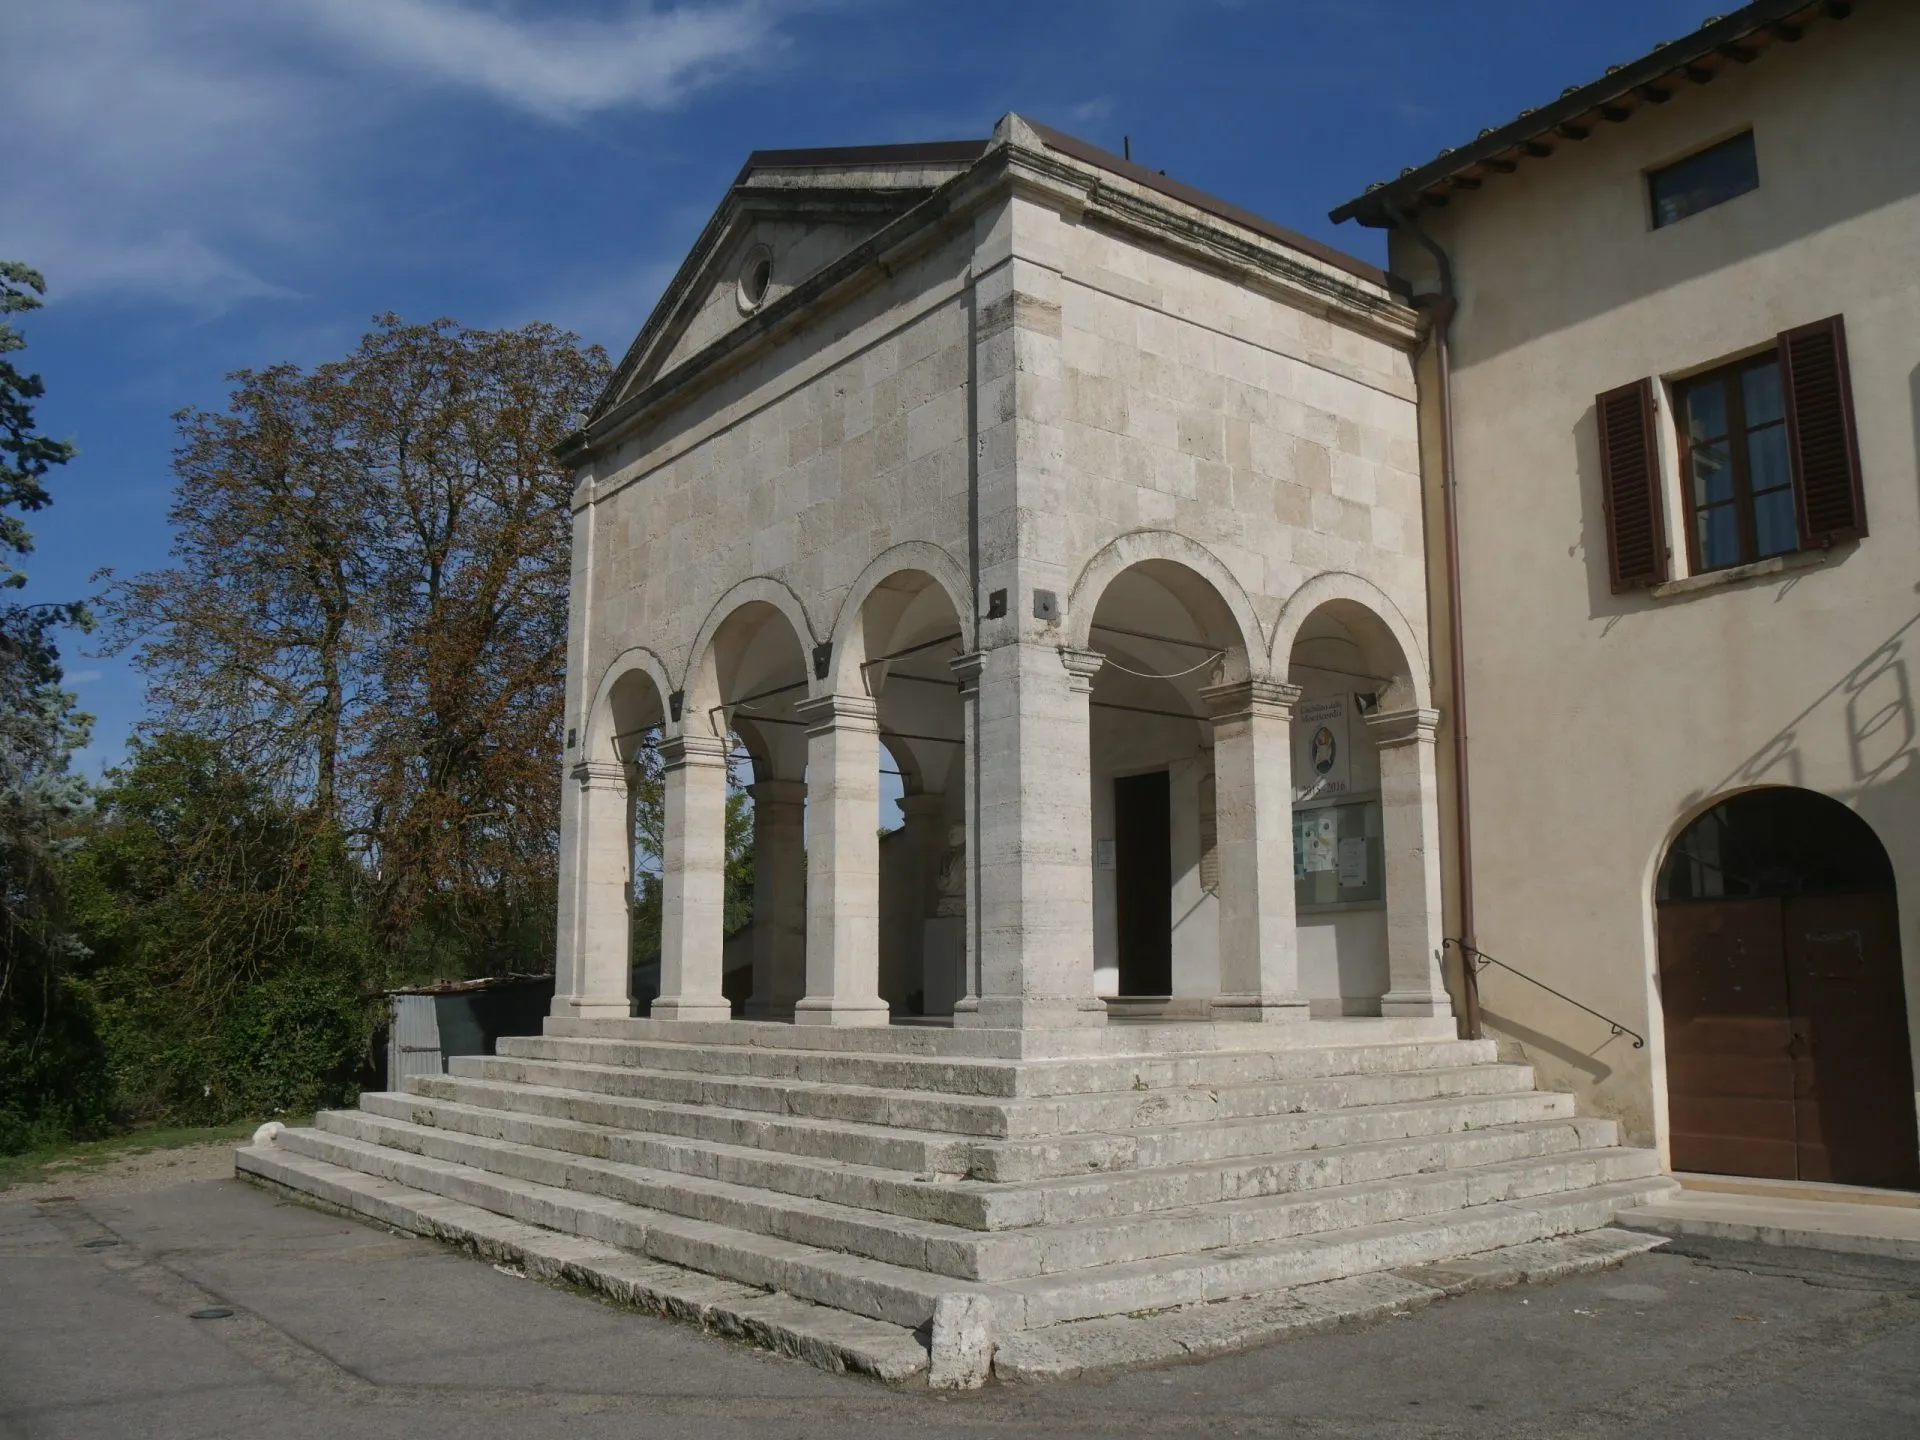 St. Martial church in Gracciano dell'Elsa has the facade with the raised entrance with a nineteenth-century loggia